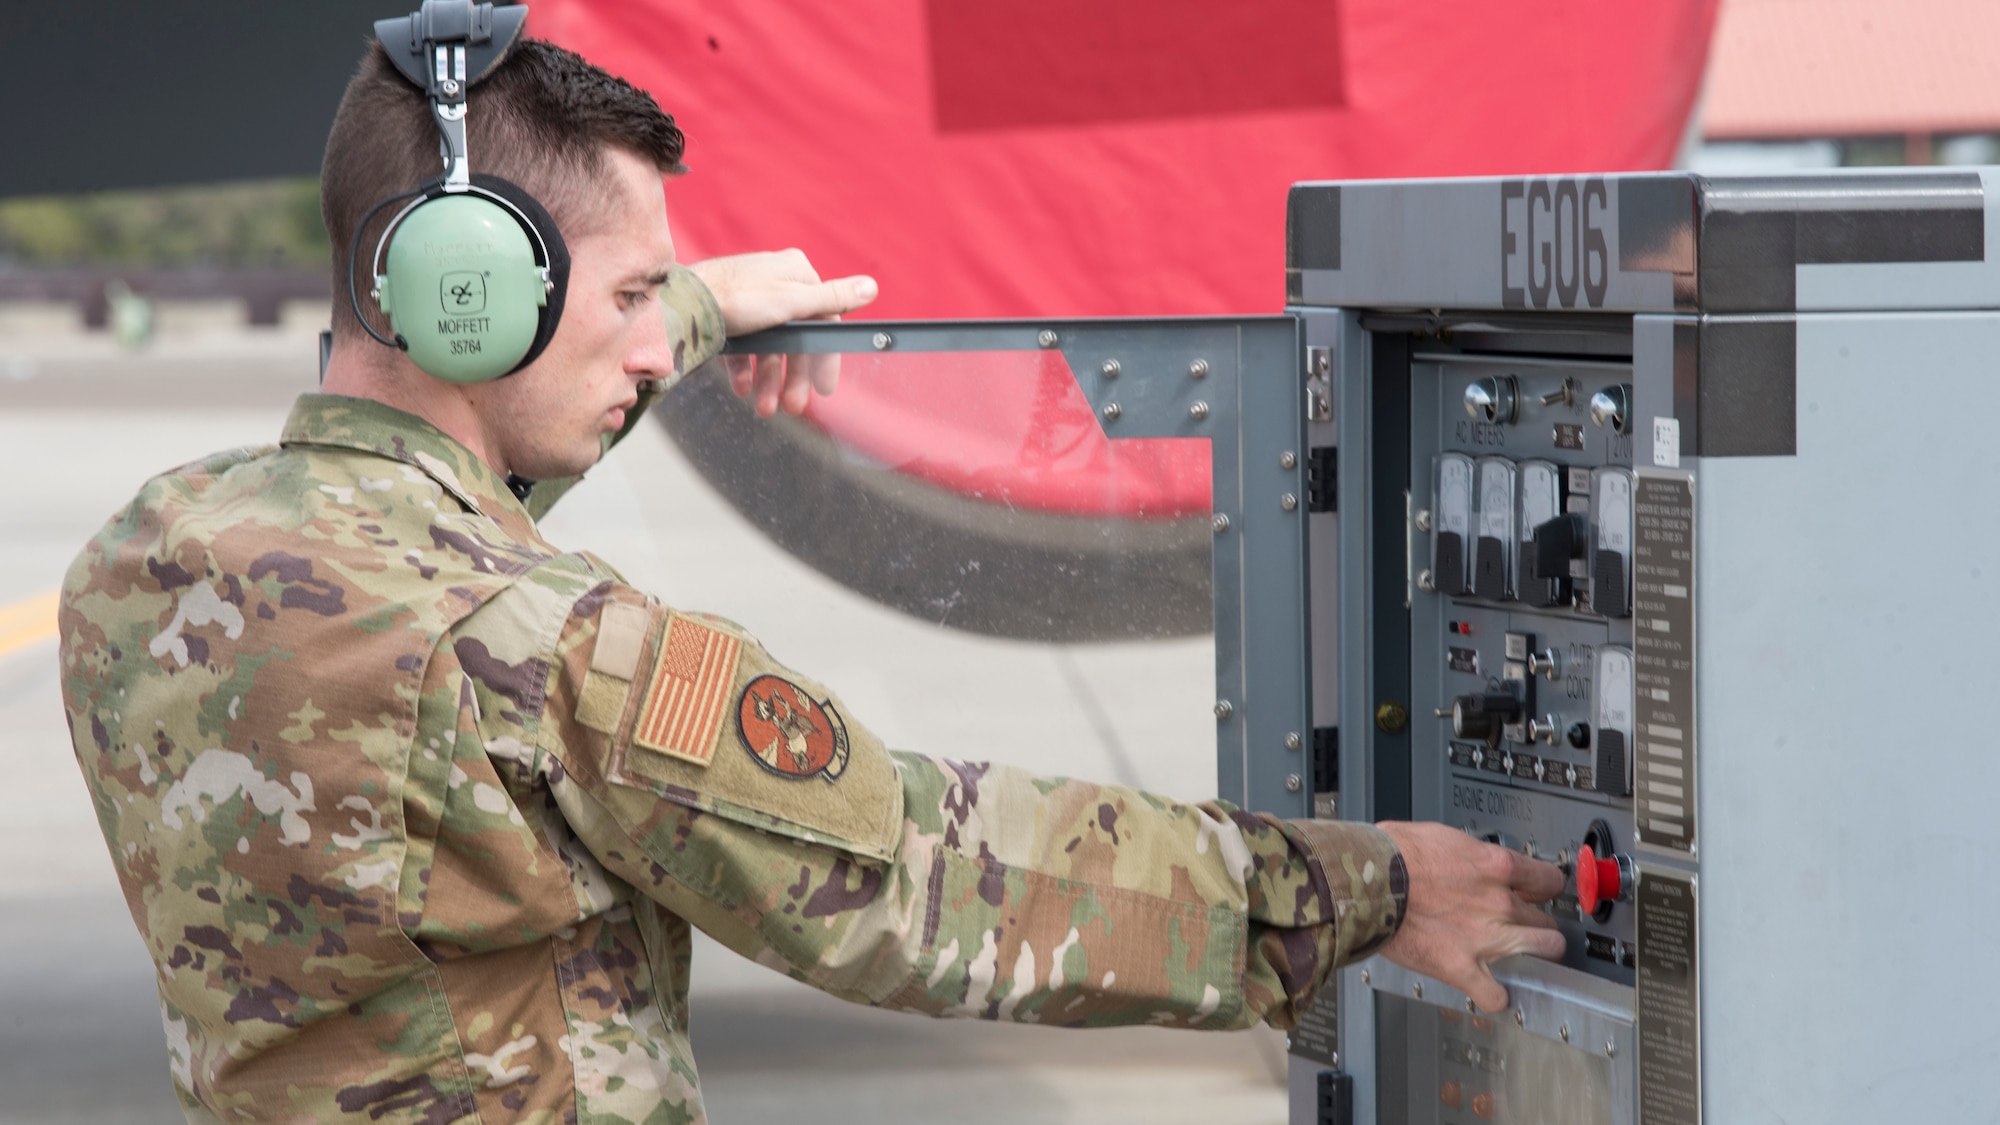 U.S. Air Force Senior Airman Michael Moffett, a 6th Aircraft Maintenance Squadron communication and navigation systems apprentice, starts a generator to supply electrical power to a KC-135 Stratotanker, Jan. 23, 2020, at MacDill Air Force Base, Fla. Communication and navigation systems Airmen, inspect, repair and install integrated avionics systems to ensure proper function of flight instruments and traffic-collision avoidance systems.